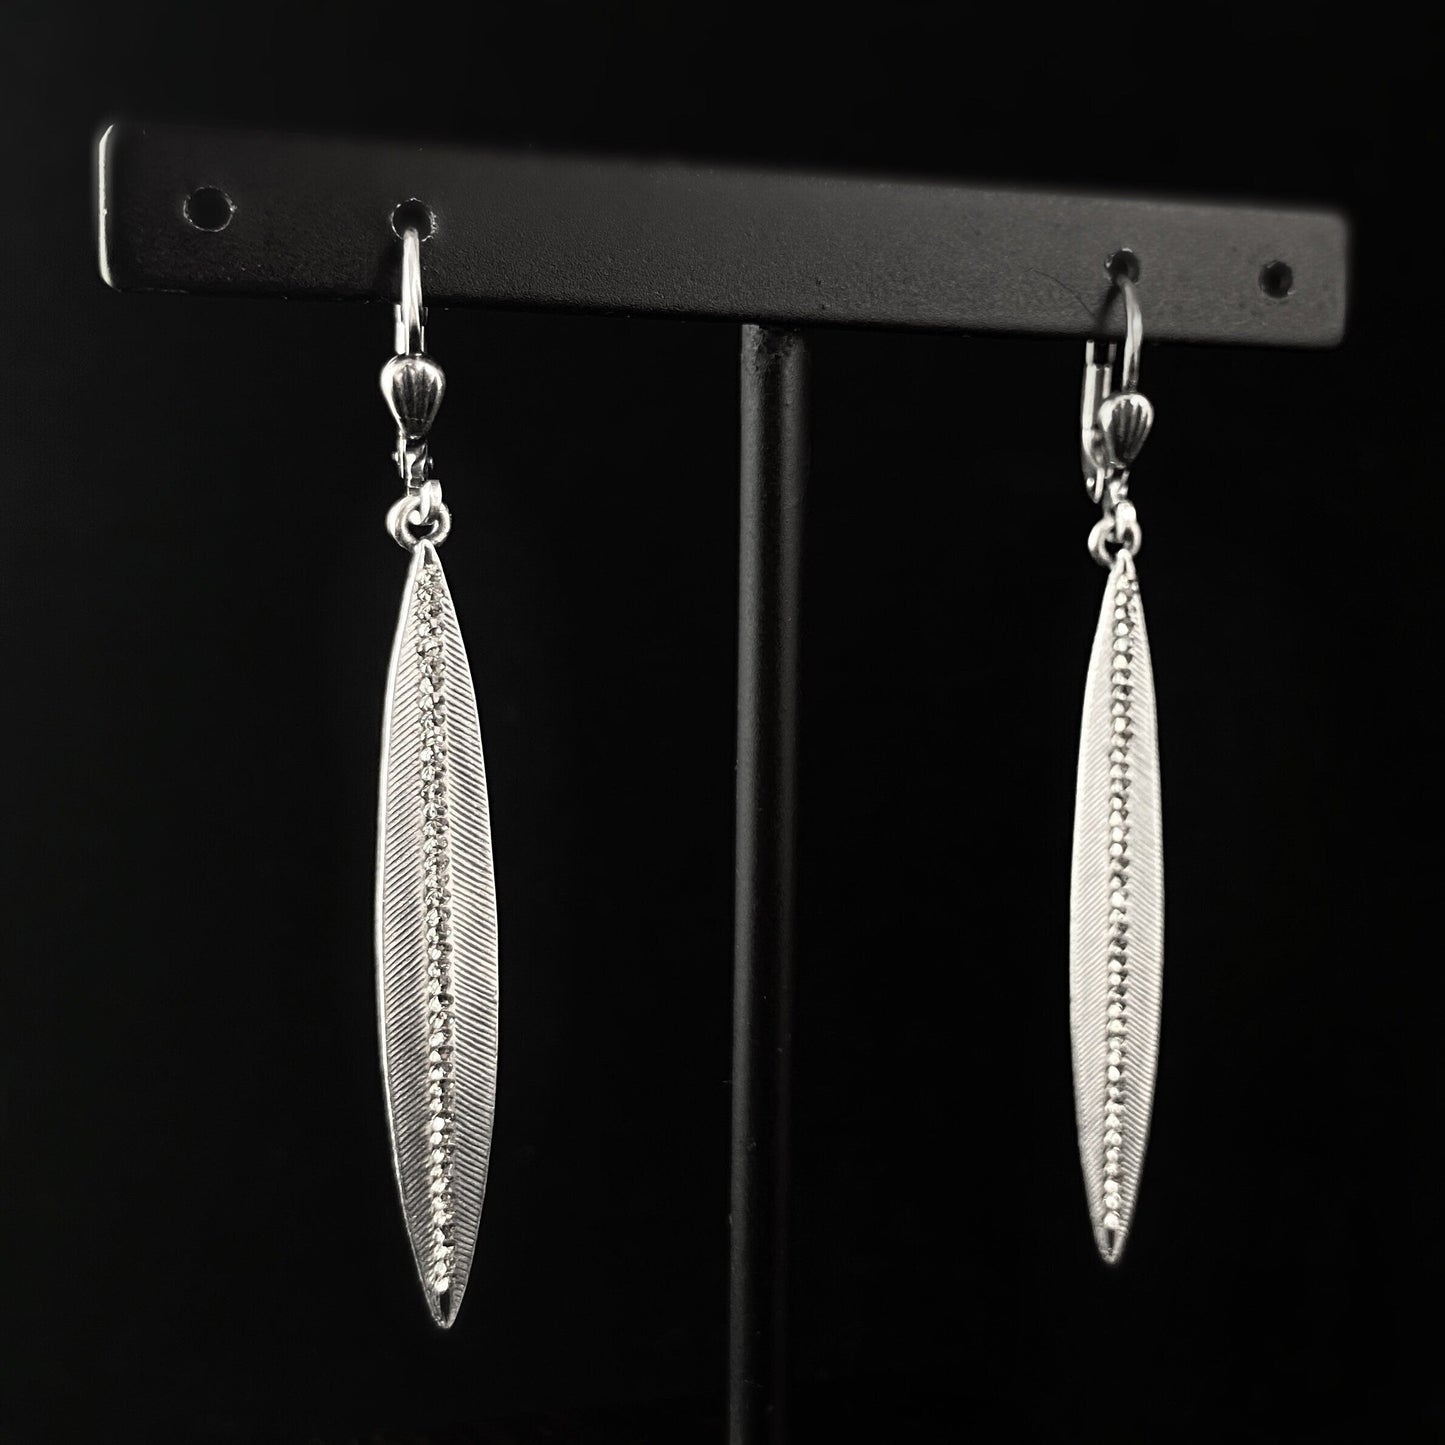 Silver Spear Earrings with Clear Swarovski Crystals - La Vie Parisienne by Catherine Popesco